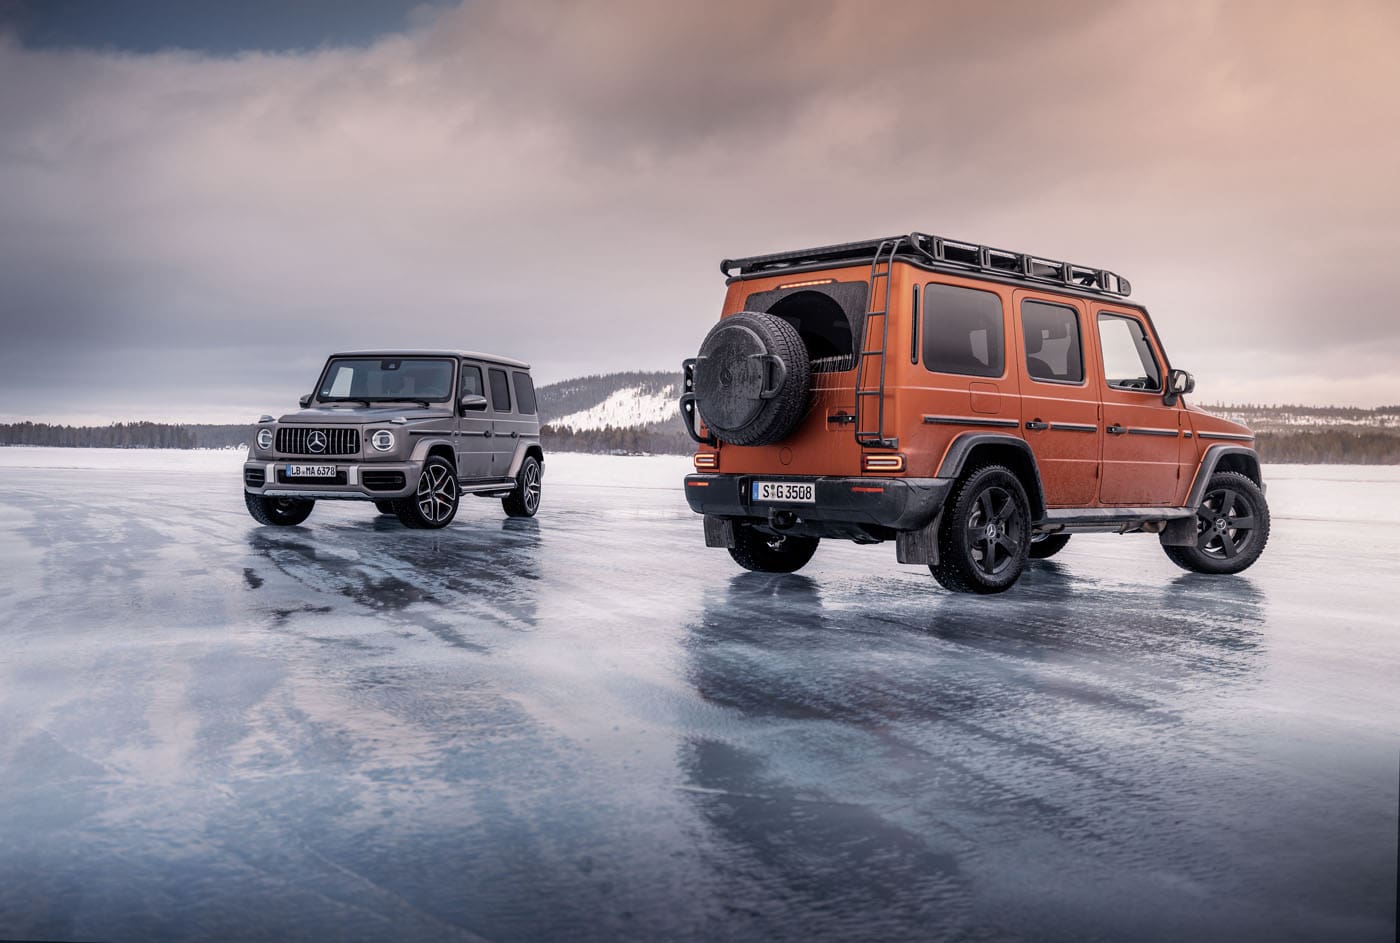 The New AMG Experience On Ice Delivers Winter Driving Thrills